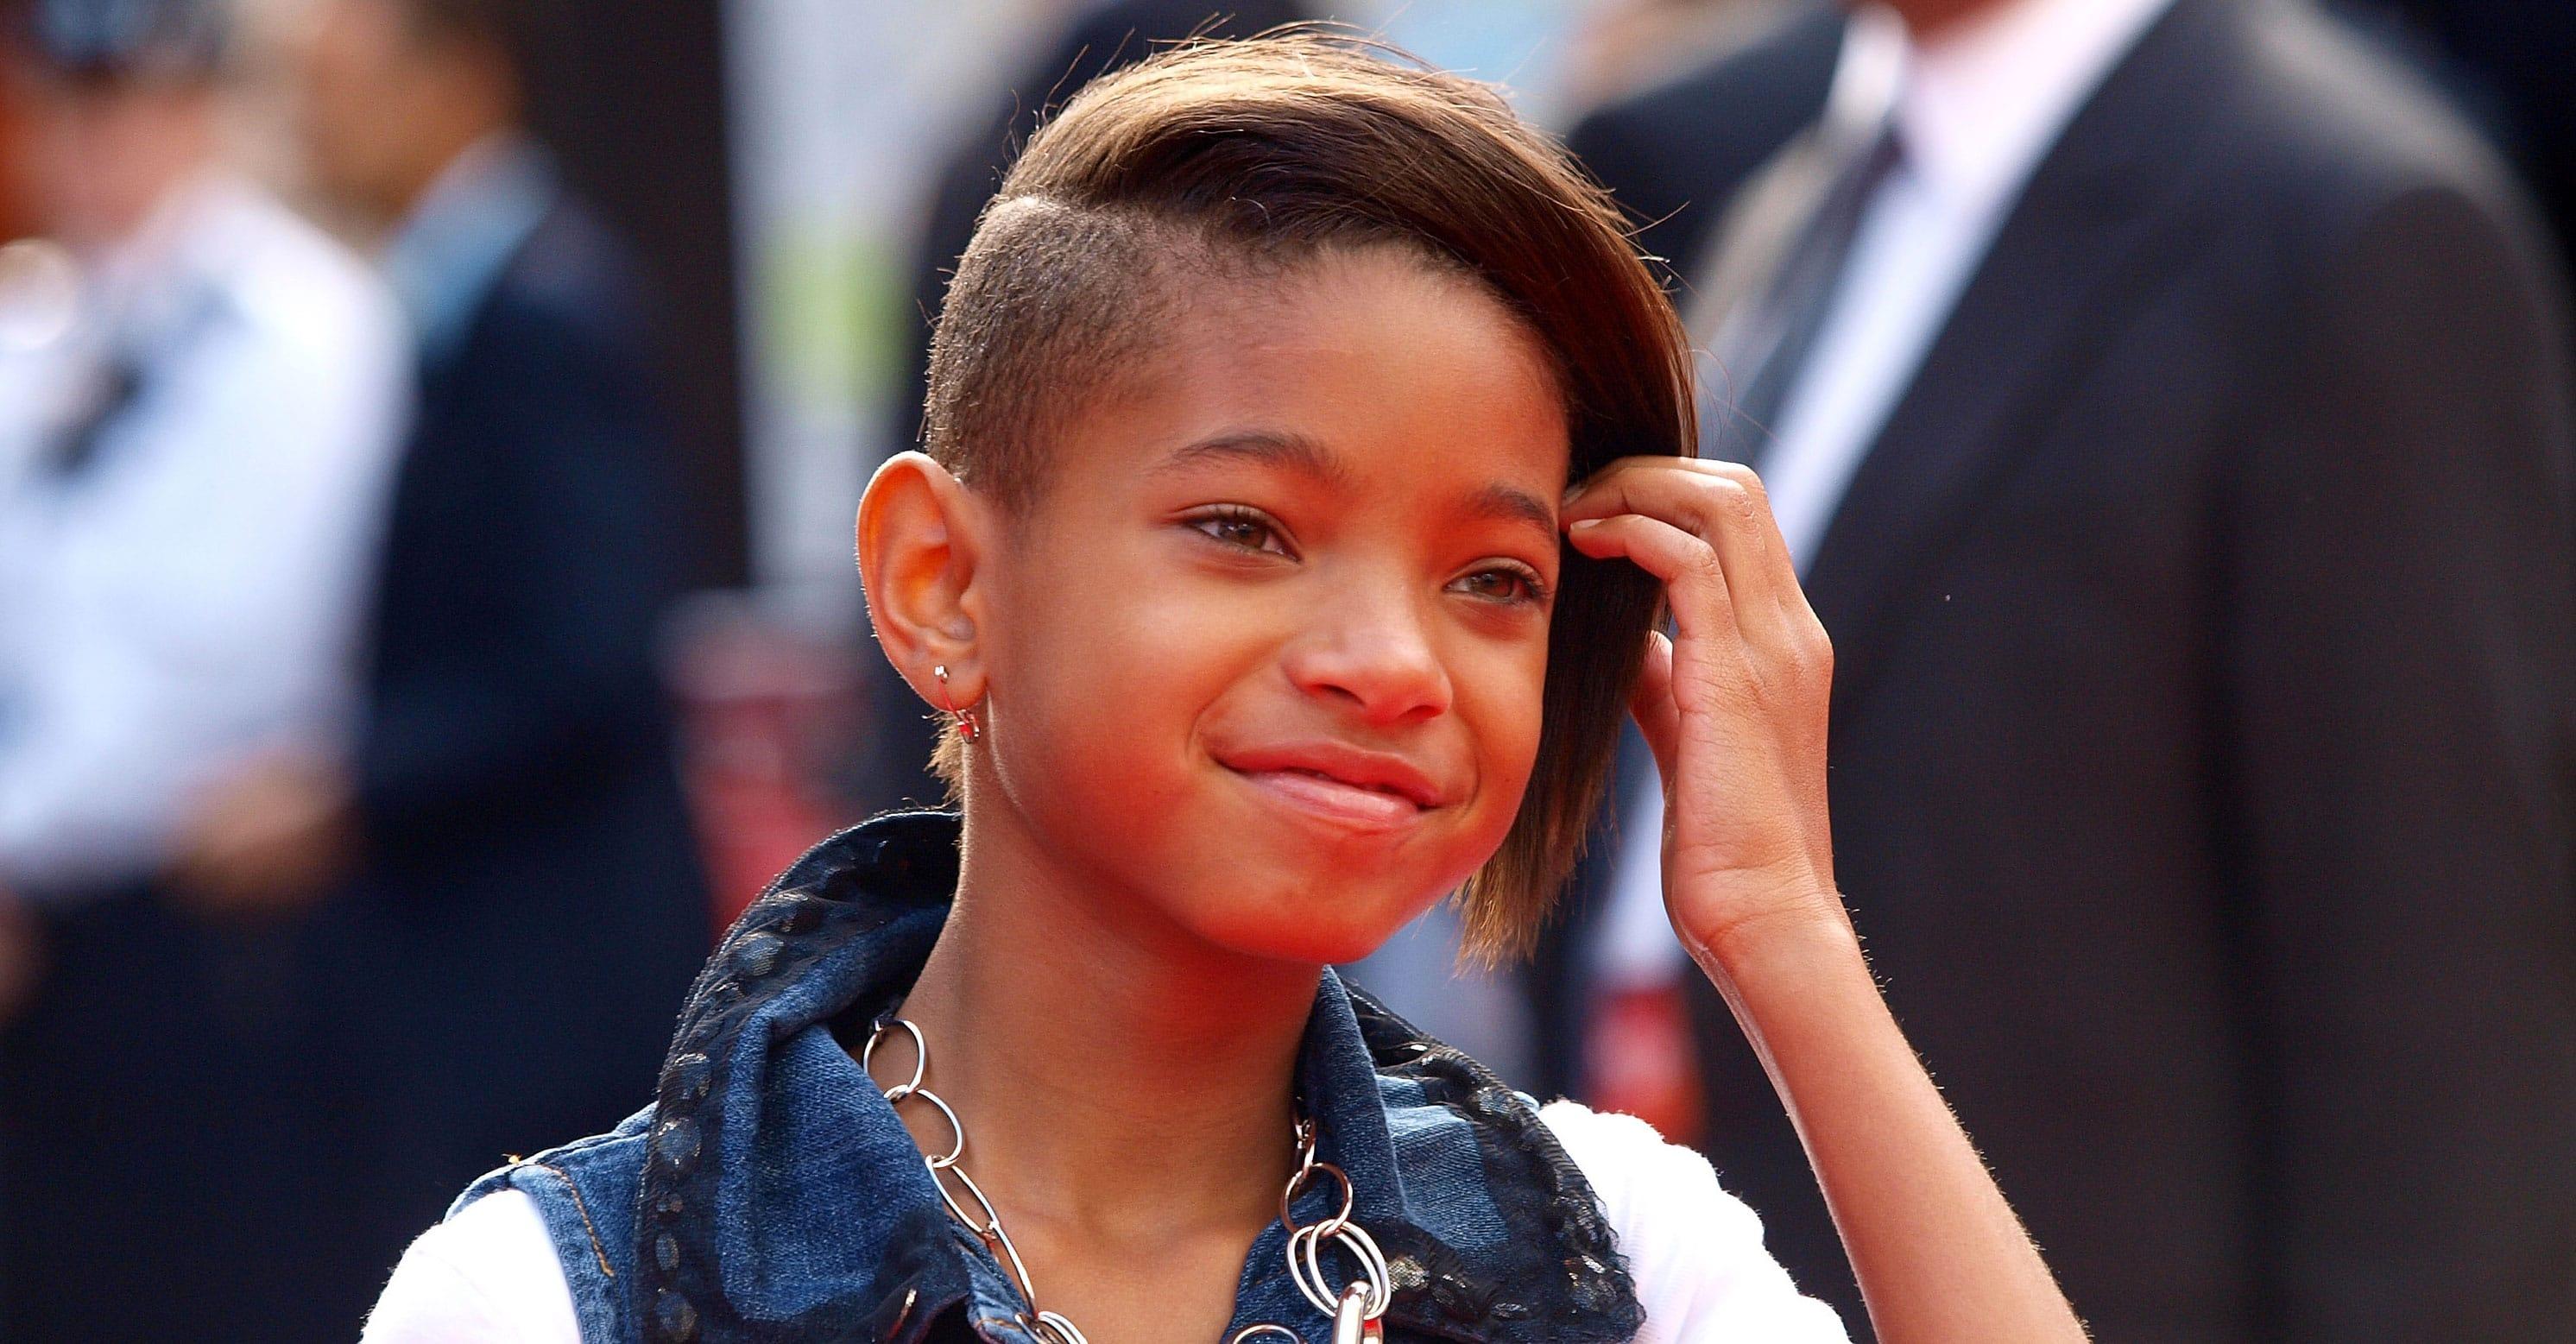 Willow Smith Wallpaper High Quality